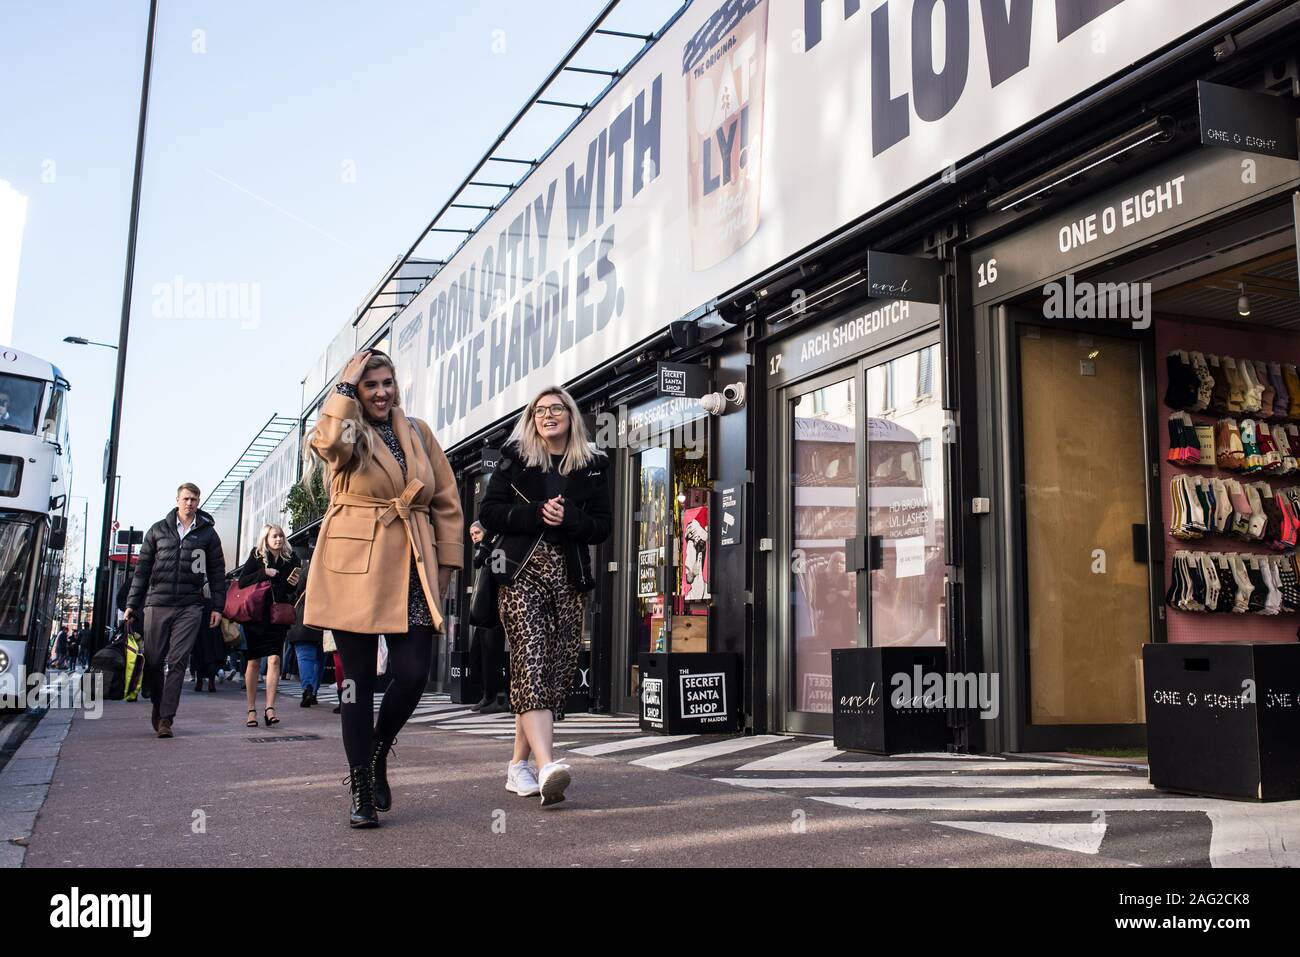 London, England - November 2019: People walking and shopping at the BOXPARK, a cool pop up shopping venue with several indie shops and bars Stock Photo